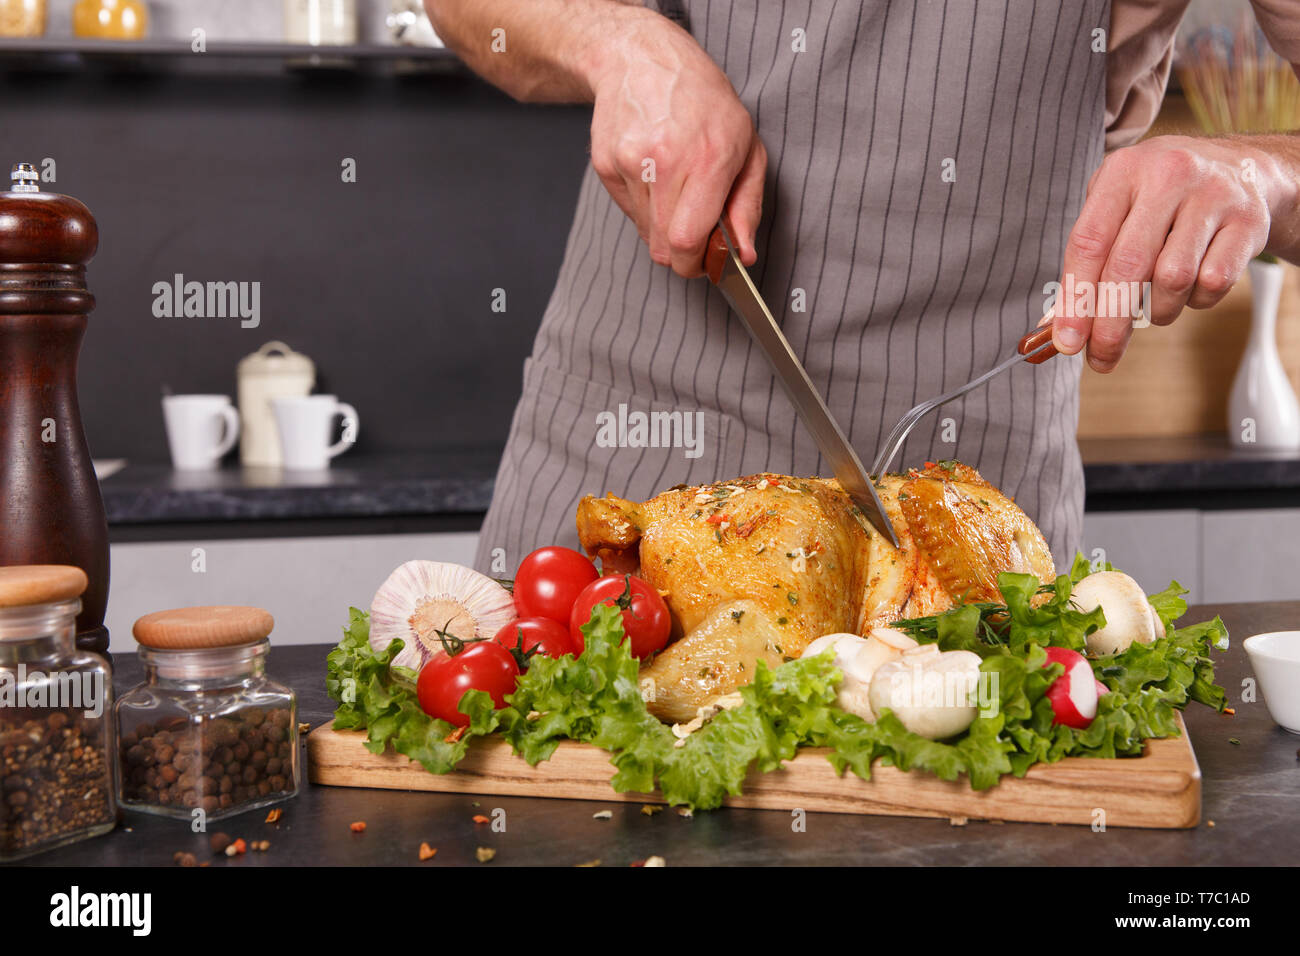 Hands of chief man cuting baked chicken with vegetables with a big knife on a wooden plate in a restaurant Stock Photo